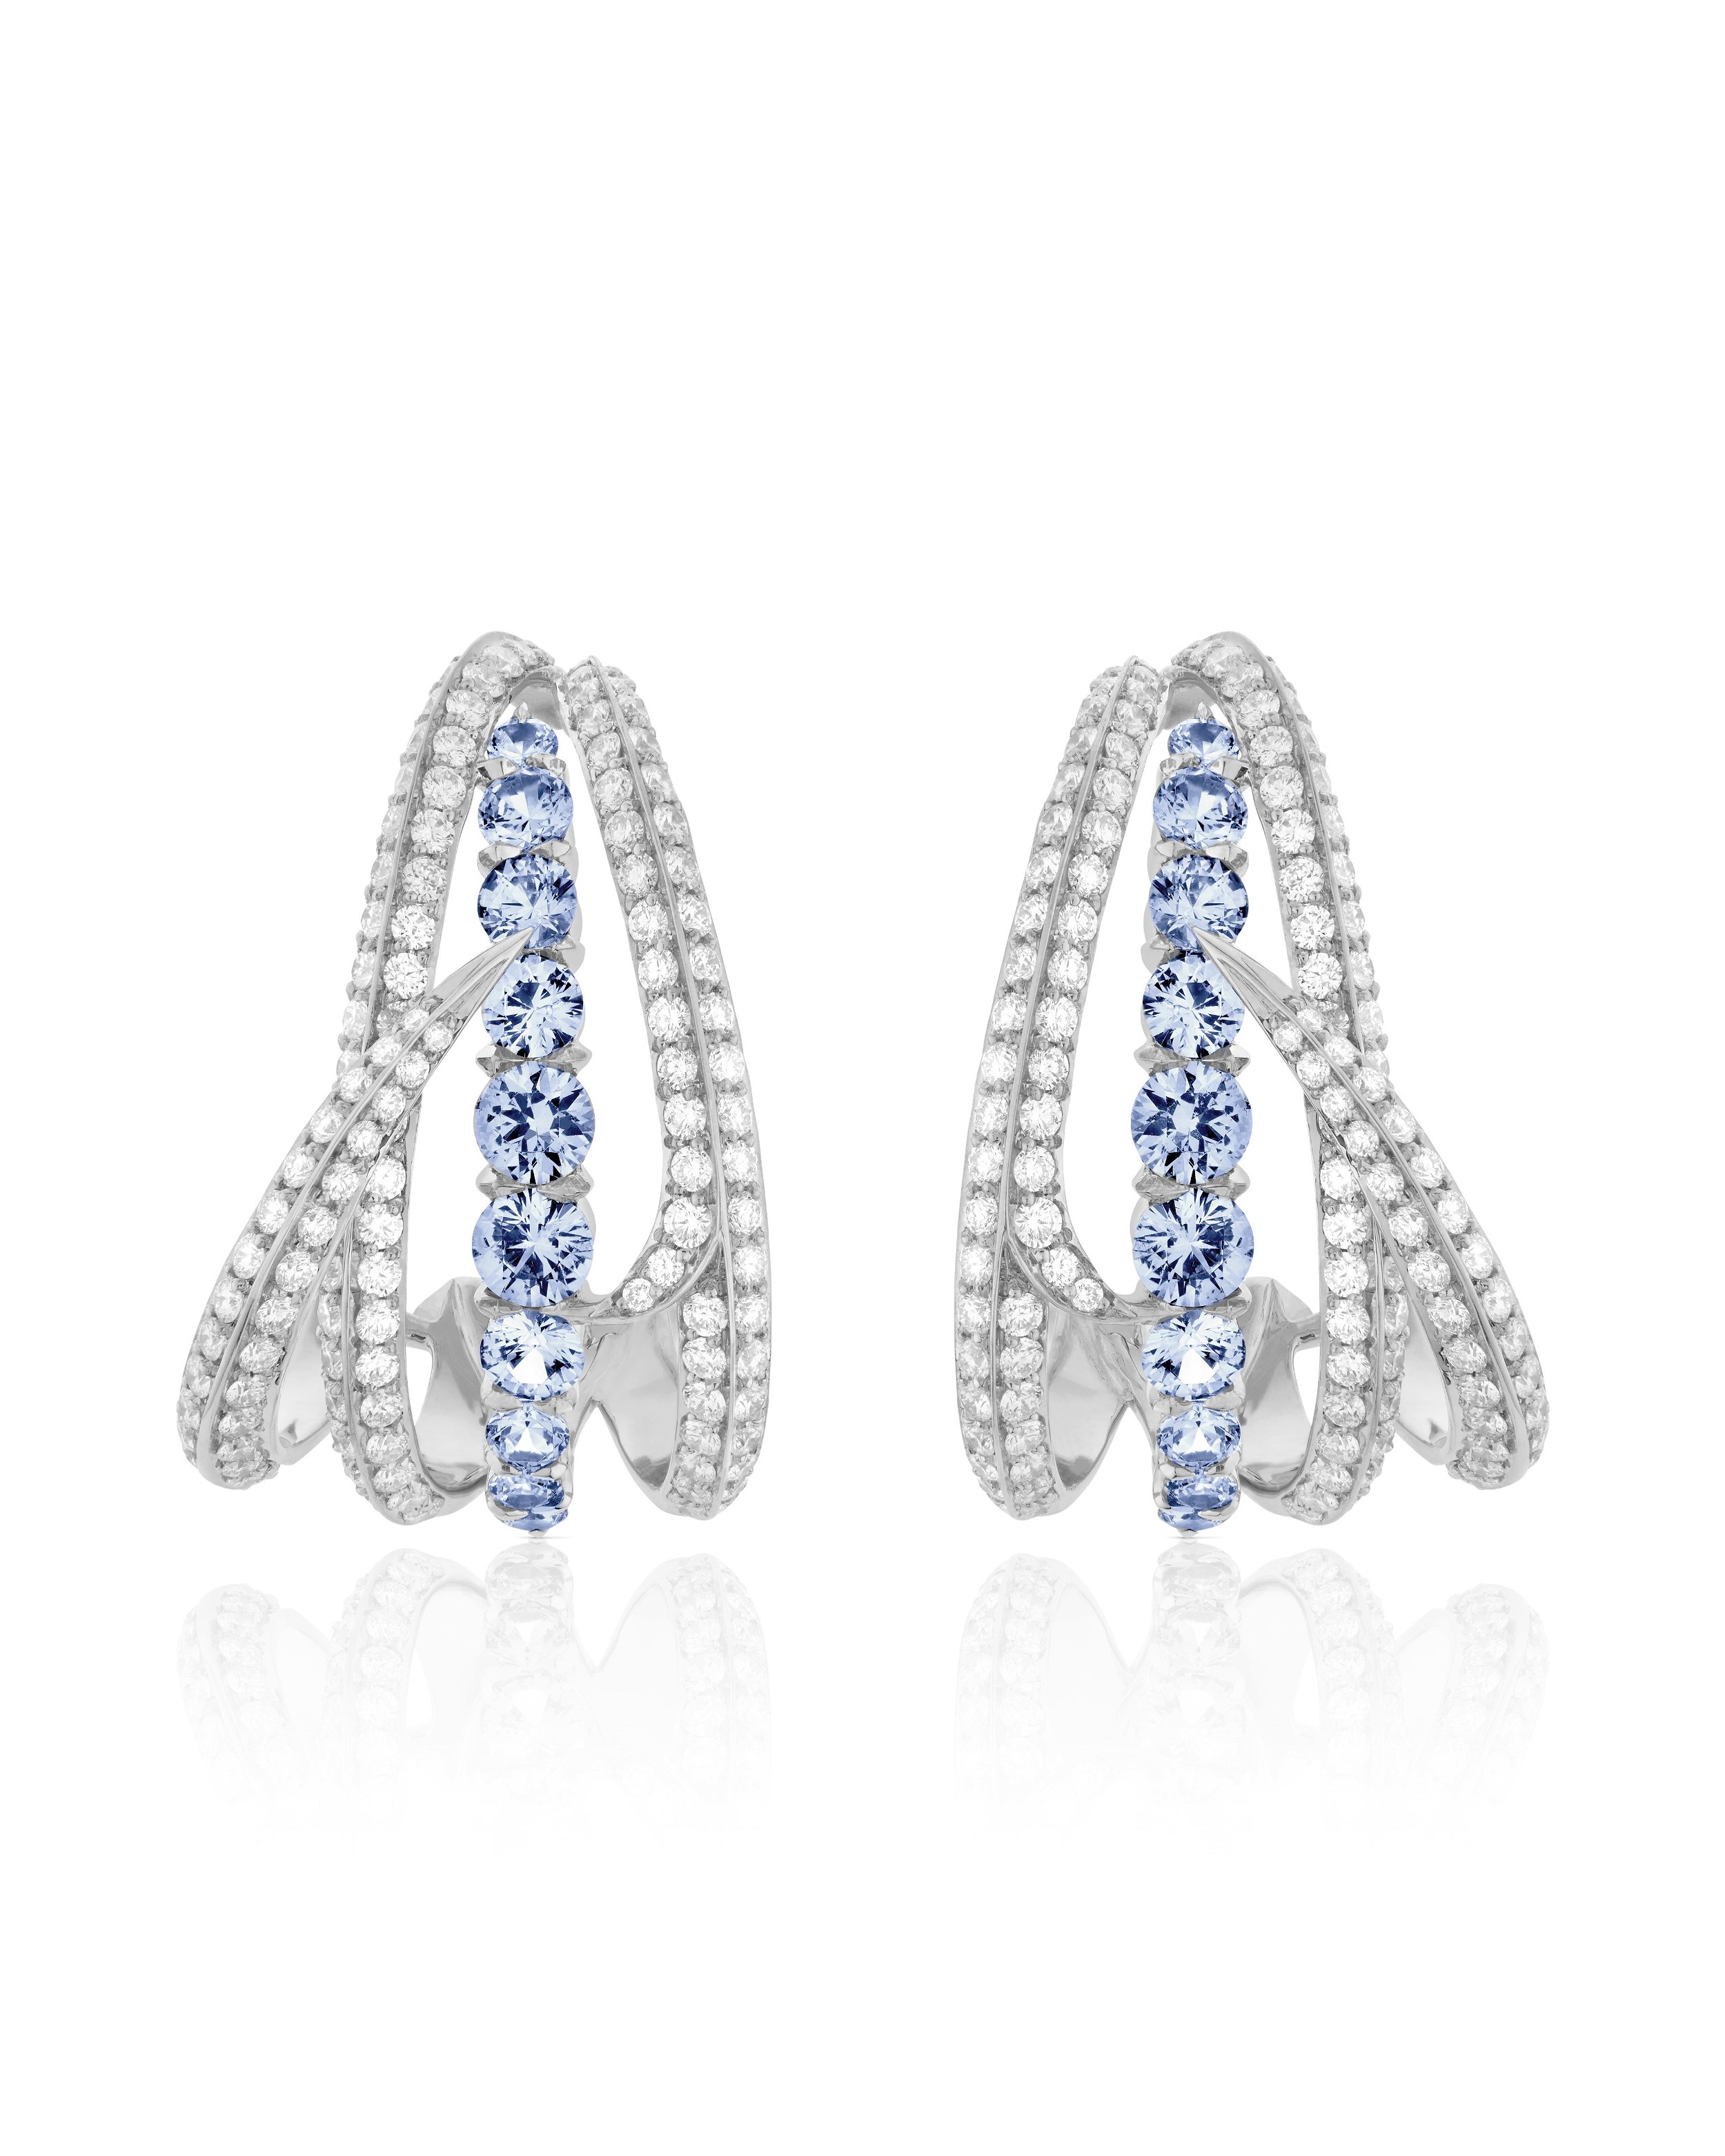 Thorn Embrace Bound Together Gem Cuff Earrings with Light Blue Sapphires and White Diamonds in 18kt White Gold